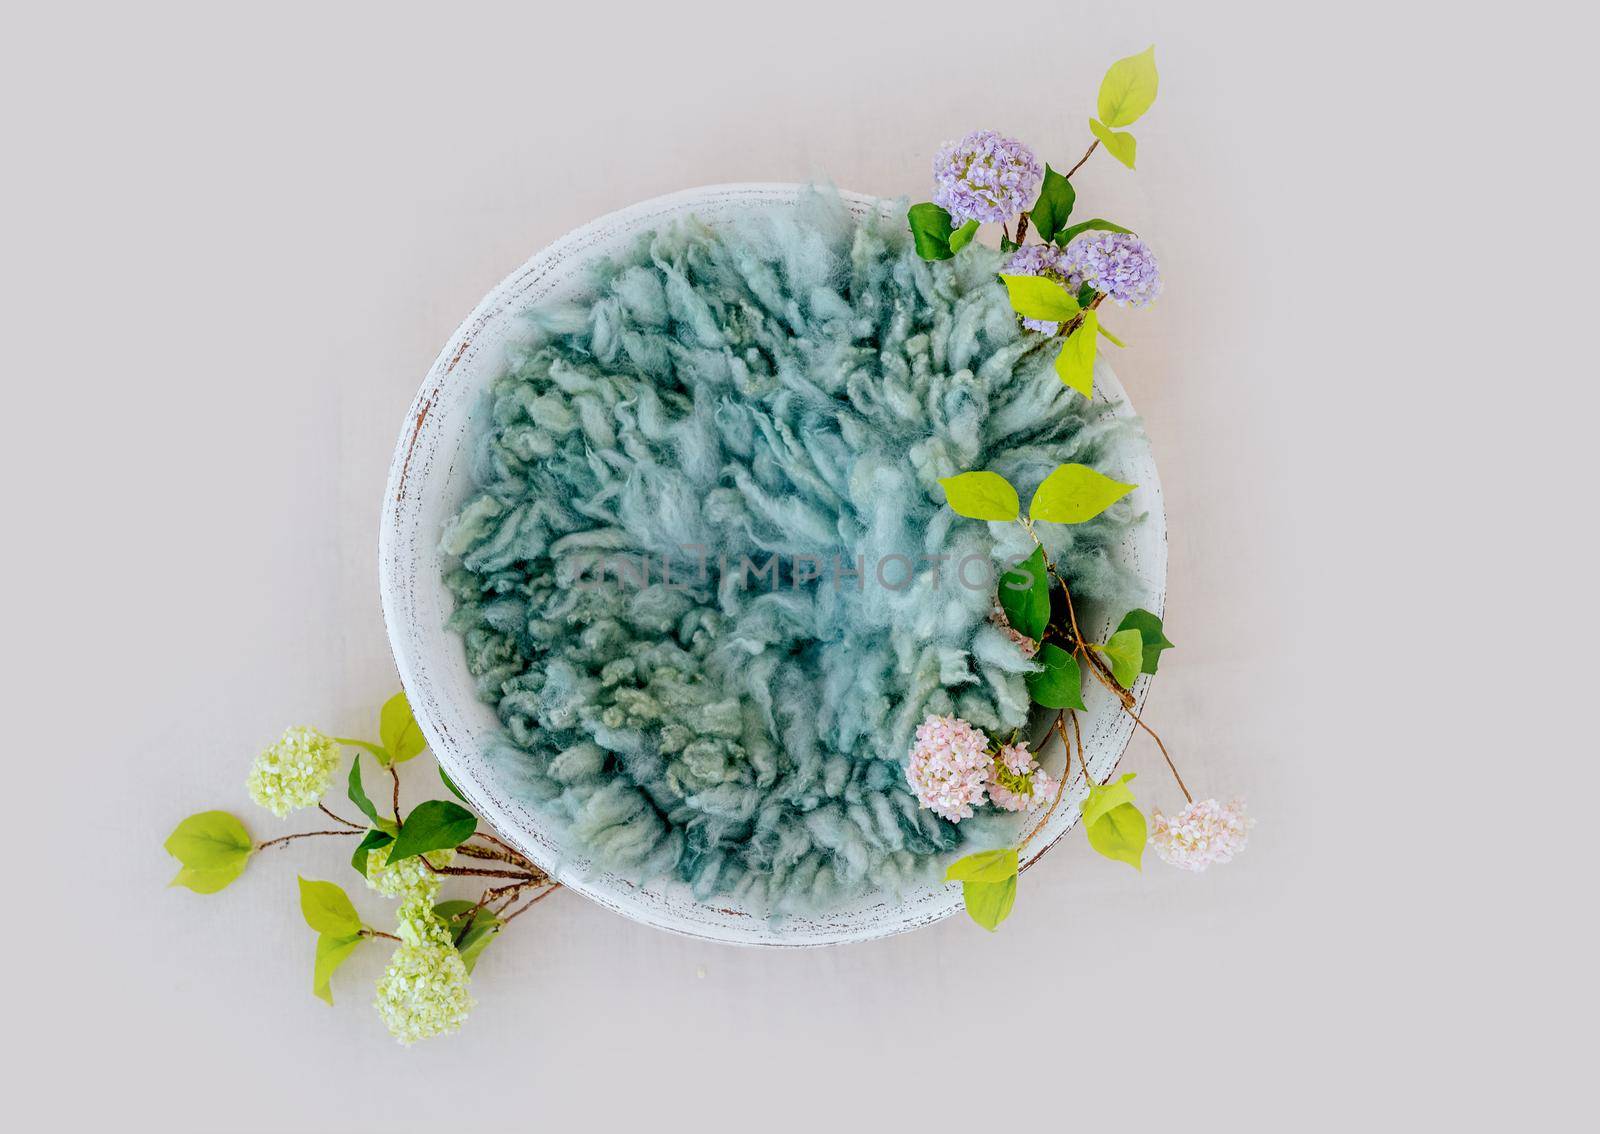 Wooden stylized white furniture bed basin with blue fur and flowers for newborn photoshoot. Designed decoration object for infant studio photo isolated on grey background with copyspace